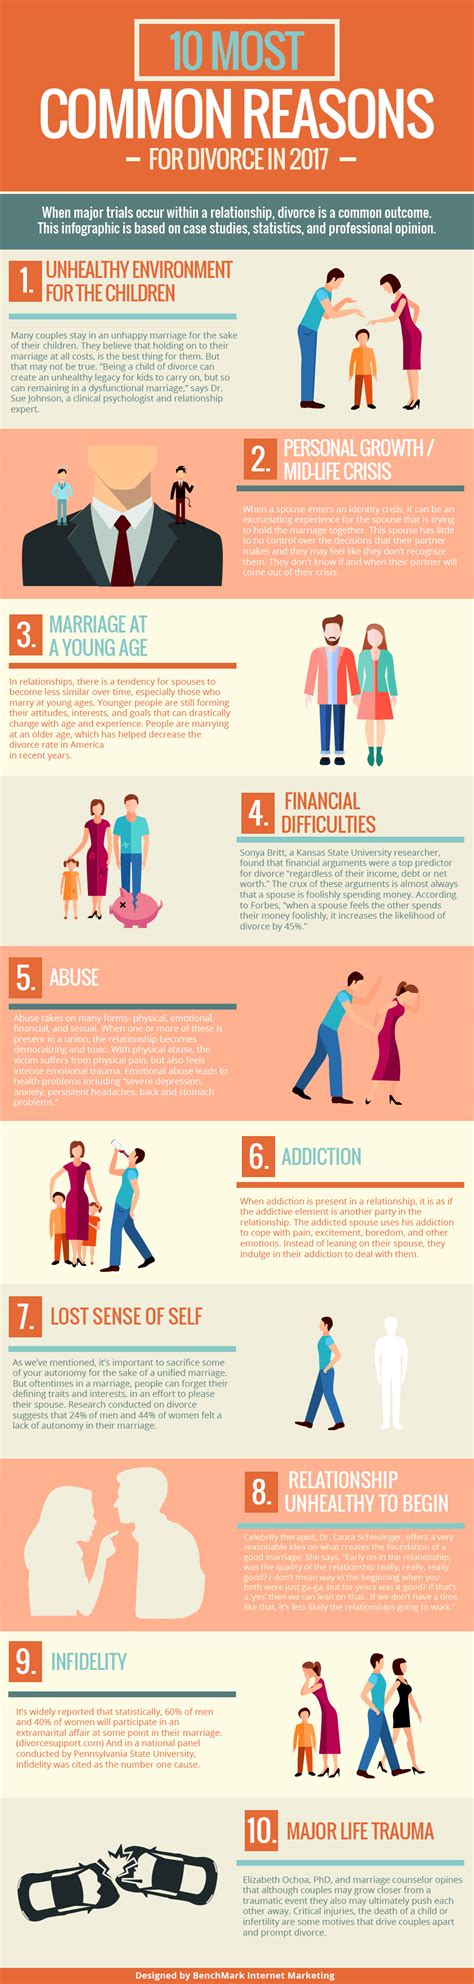 10 Common Reasons For Divorce 2017 Cool Daily Infographics